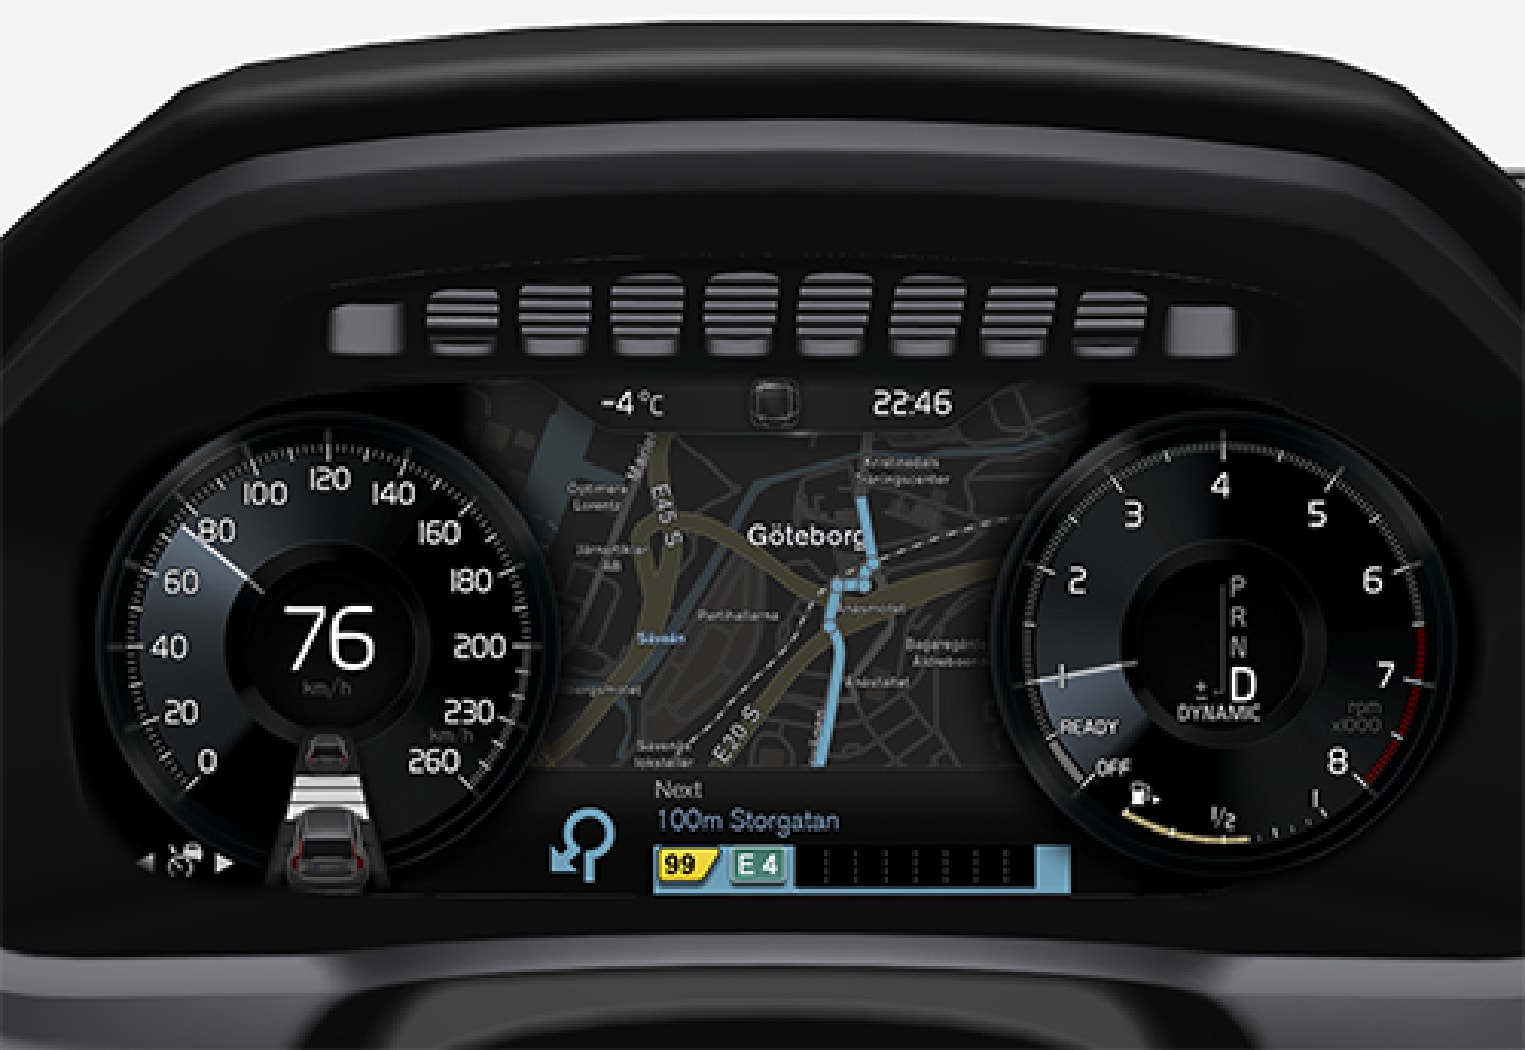 P5-1507-Navigation, overview driver display 12 inch